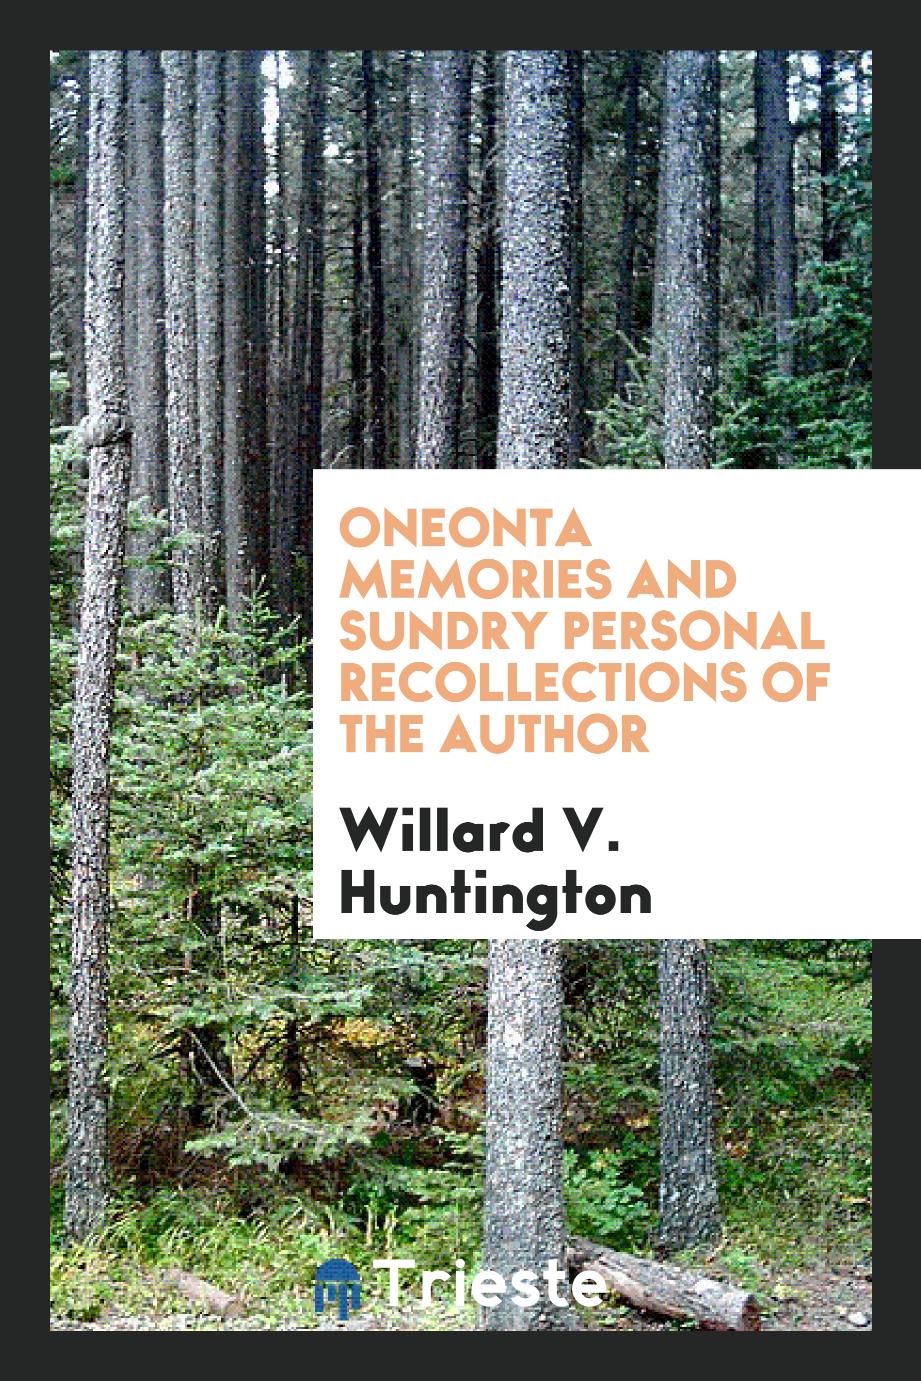 Oneonta memories and sundry personal recollections of the author